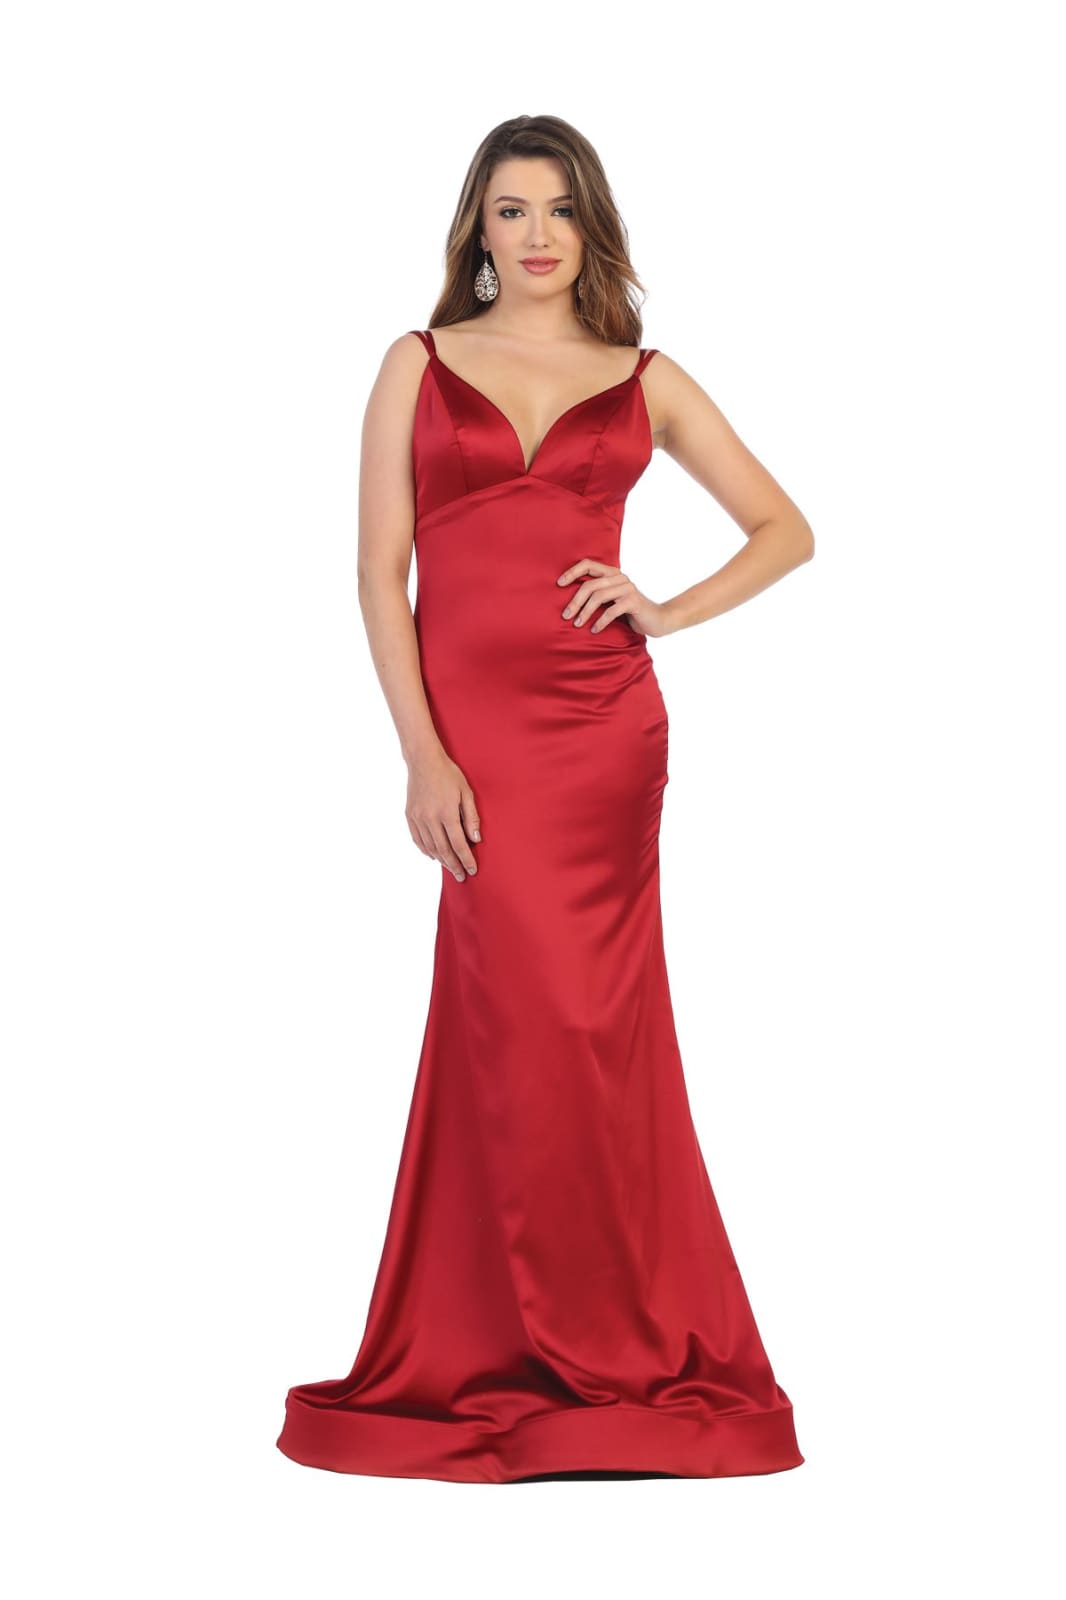 Cowl Neck Stretch Satin Fabric Evening Gown Nox E1042 | Prom dresses long  with sleeves, Plus size sequin dresses, Evening gowns